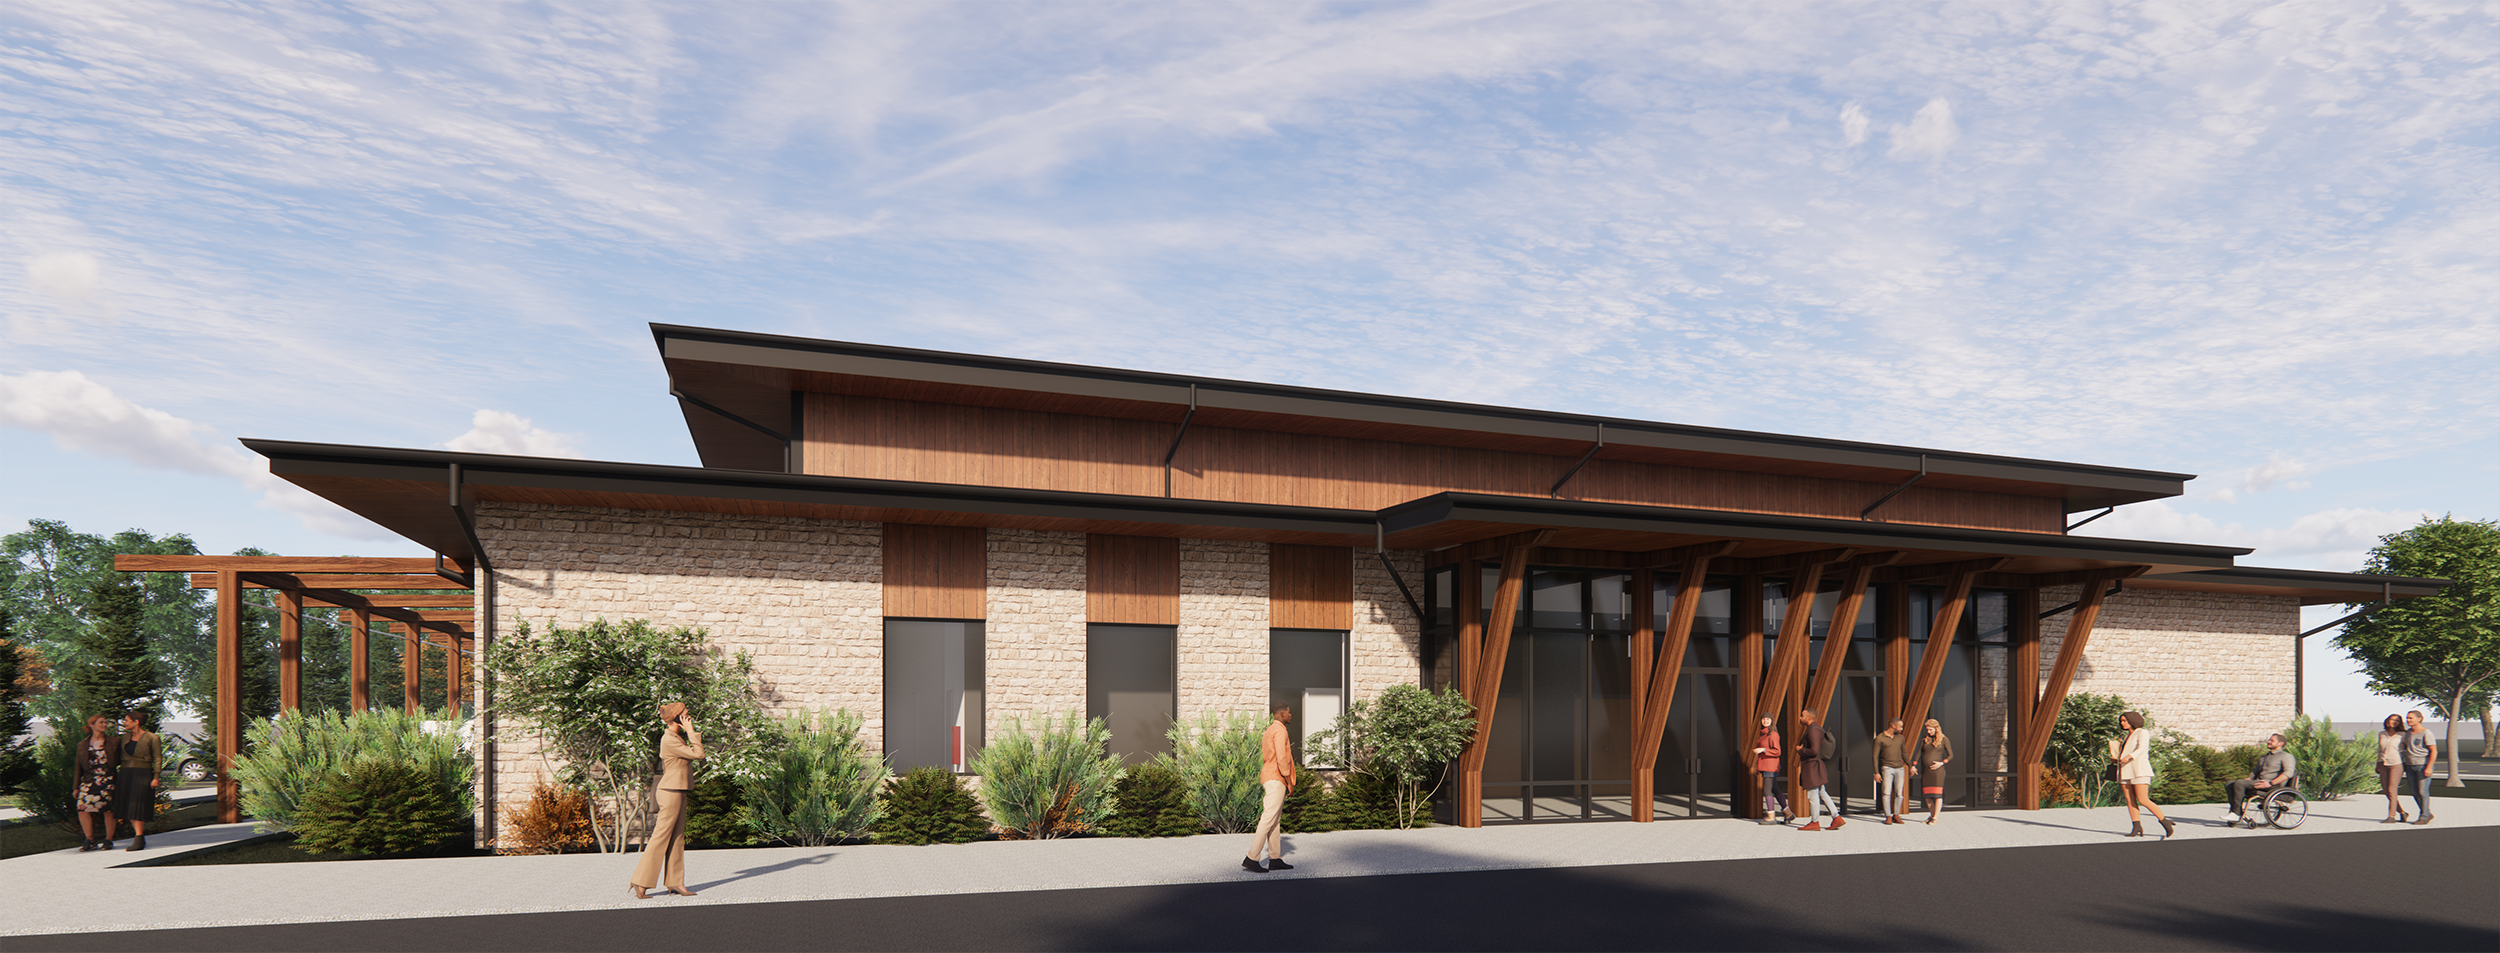 Exterior rendering of an event center being designed in East Ridge, TN. 